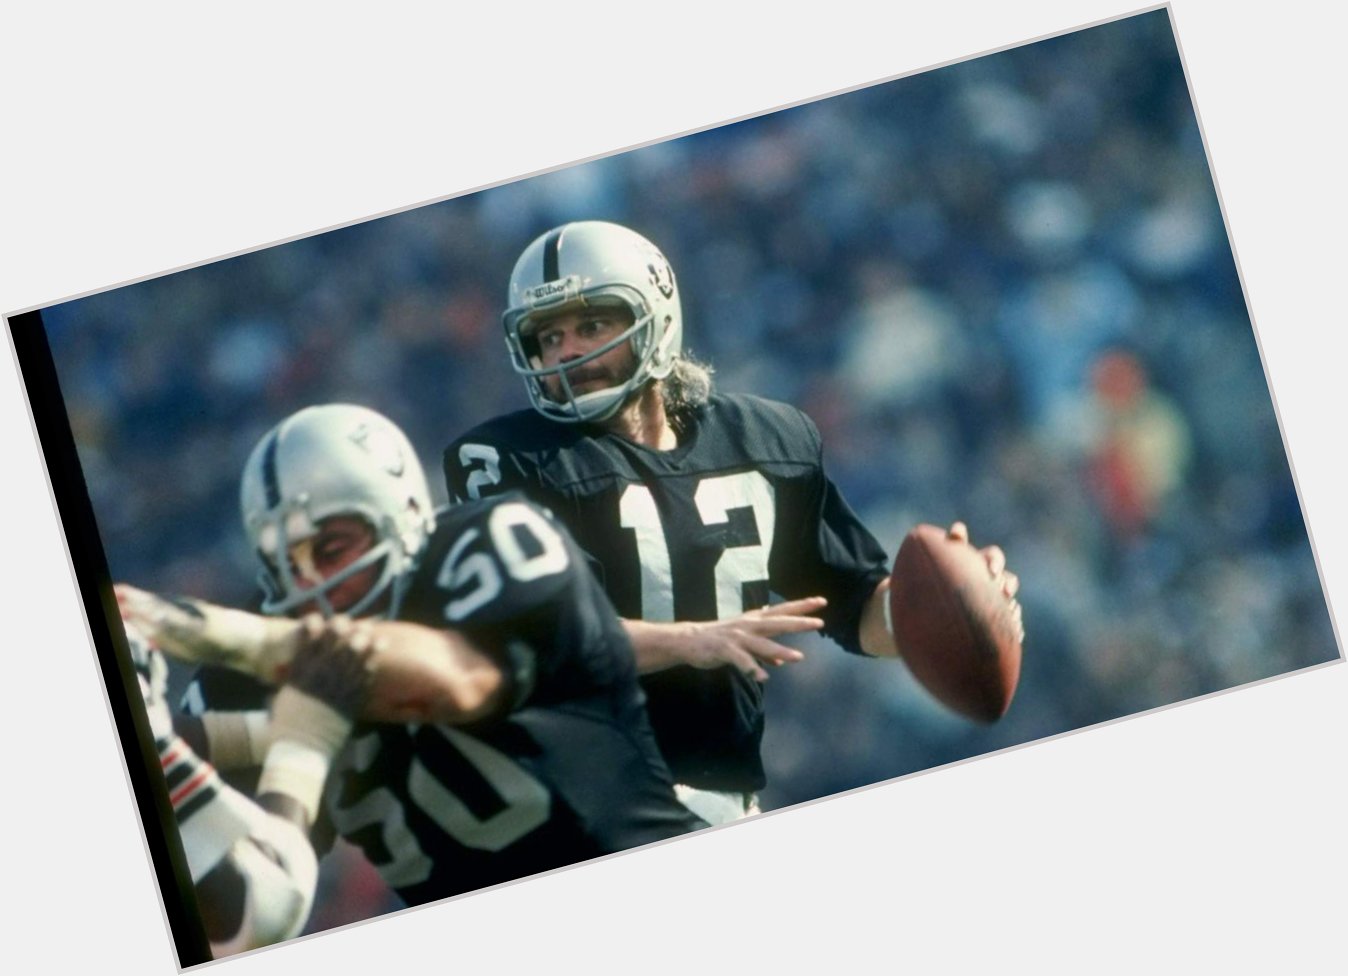 Happy birthday to the \Snake\, Ken Stabler, born on Christmas Day 1945 (d 2015) 